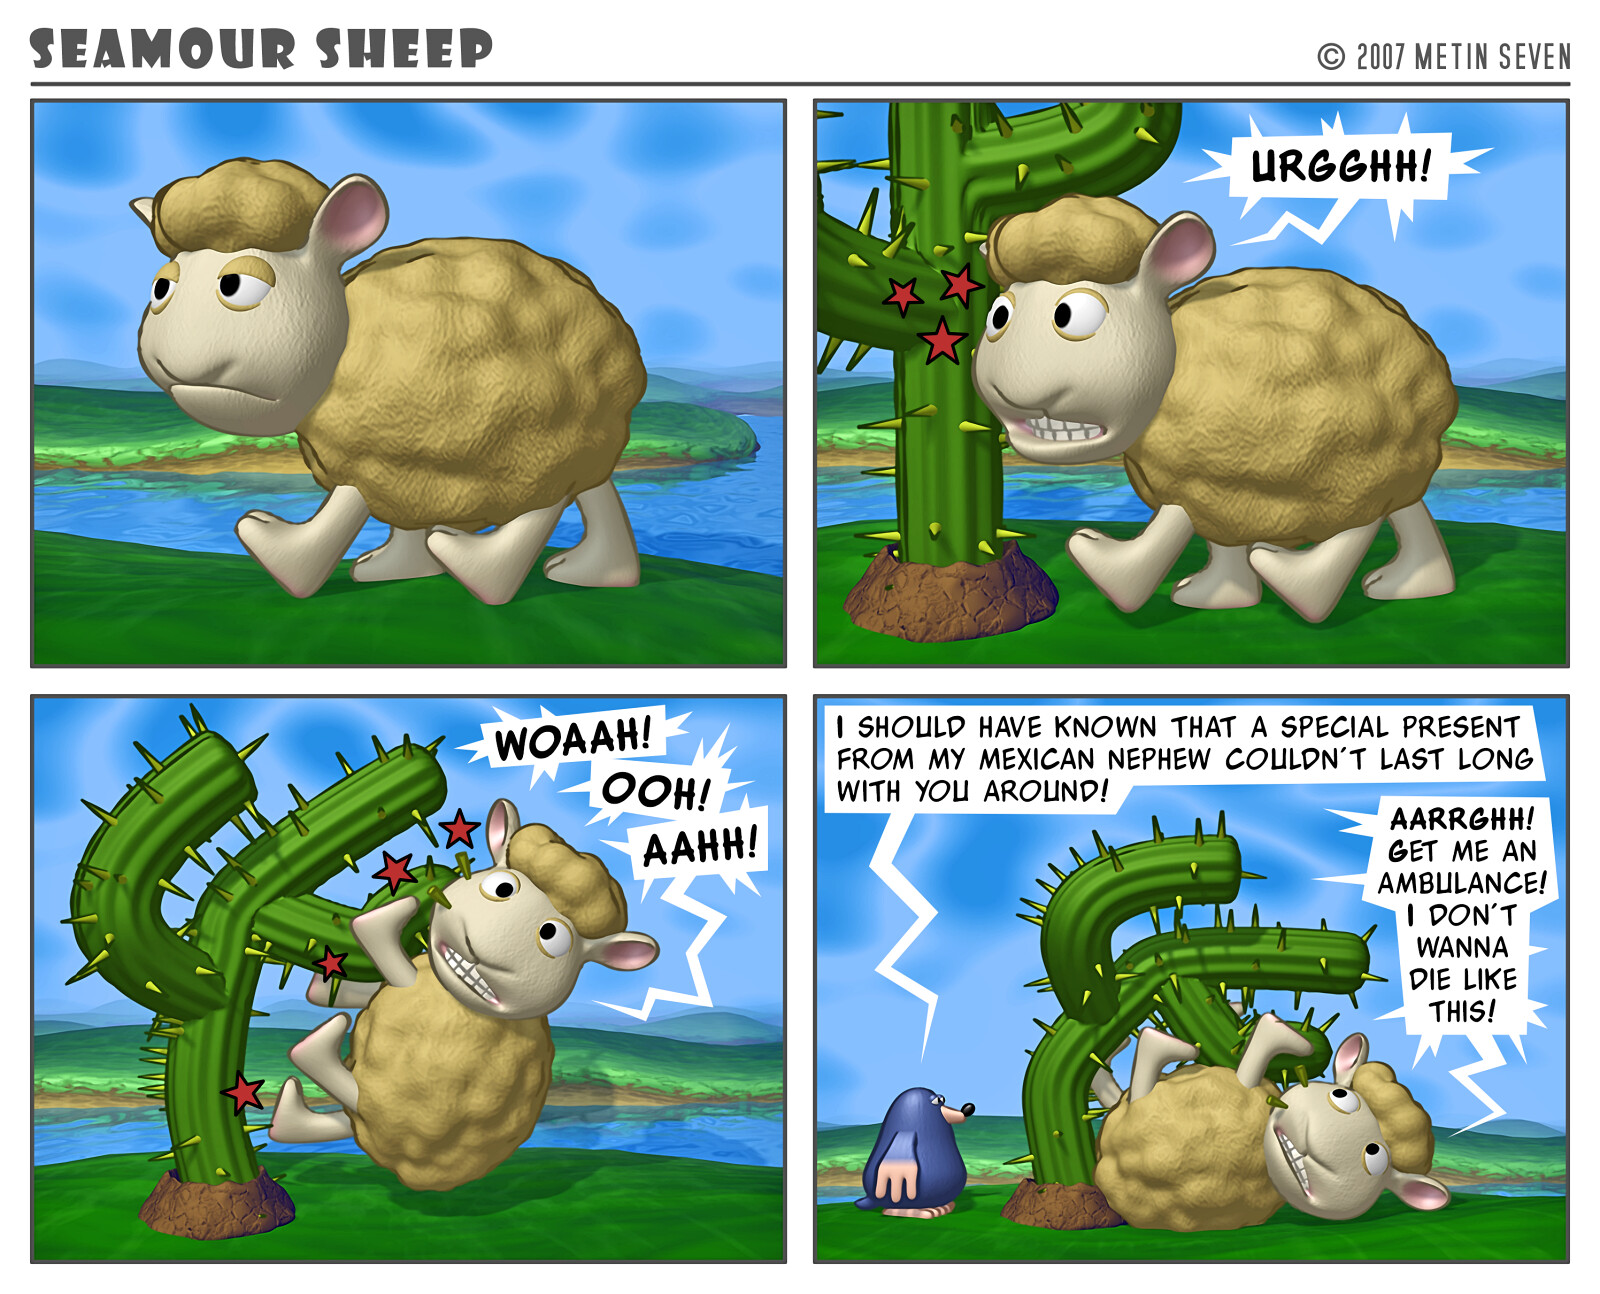 Seamour Sheep and Marty Mole comic strip episode: Prickly present